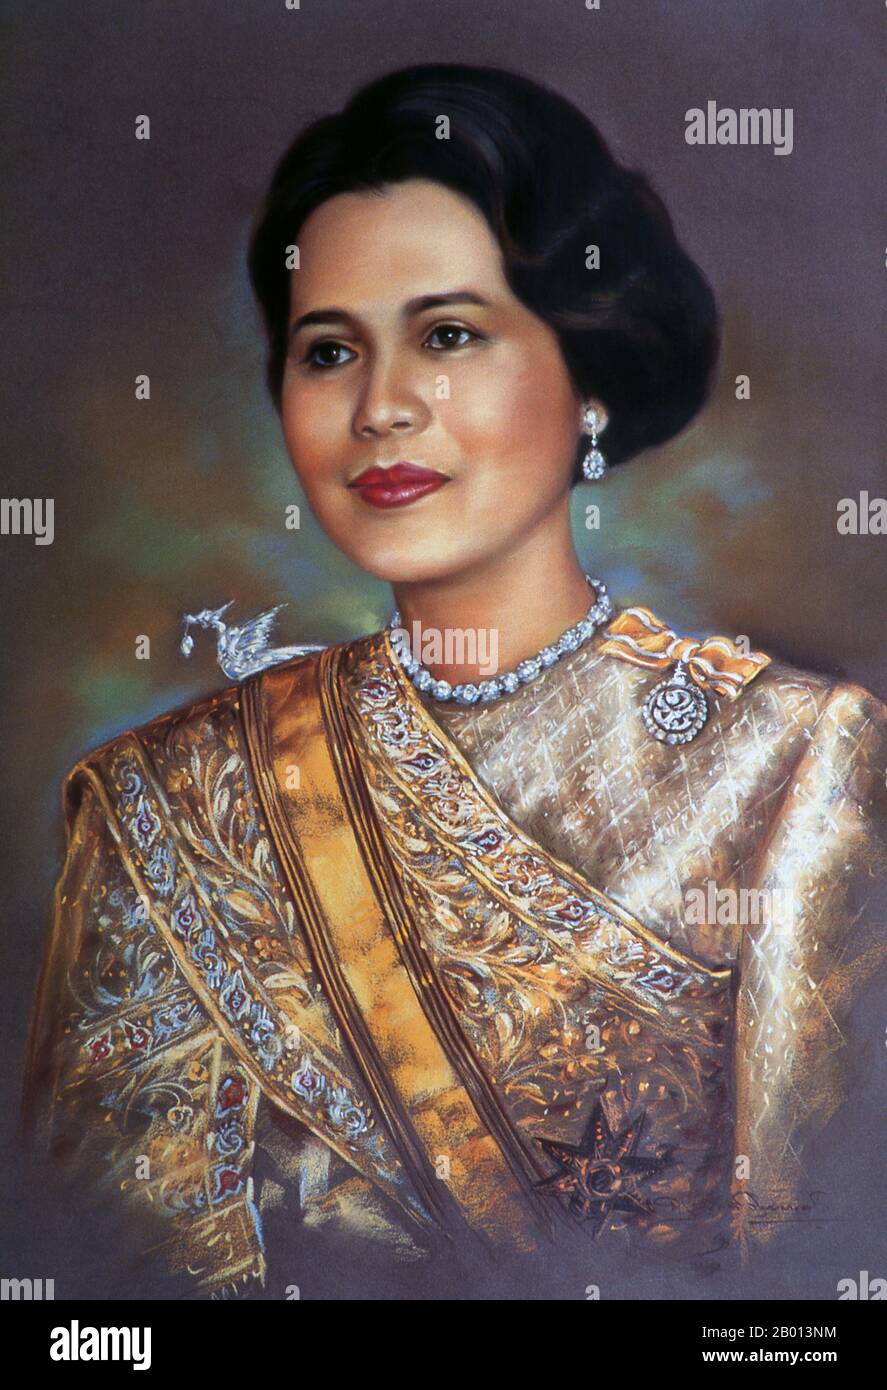 Thailand: Queen Sirikit (12th August 1932 - ), consort of Bhumibol Adulyadej (Rama IX), King of Thailand. Oil on canvas painting, c. 1950s-1960s.  Somdet Phra Nang Chao Sirikit Phra Borommarachininat, born Mom Rajawongse Sirikit Kitiyakara on August 12, 1932), is the queen consort of Bhumibol Adulyadej, King (Rama IX) of Thailand. She is the second Queen Regent of Thailand (the first Queen Regent was Queen Saovabha Bongsri of Siam, later Queen Sri Patcharindra, the queen mother). She suffered a stroke on 21 July 2012, and has not been seen in public since. Stock Photo